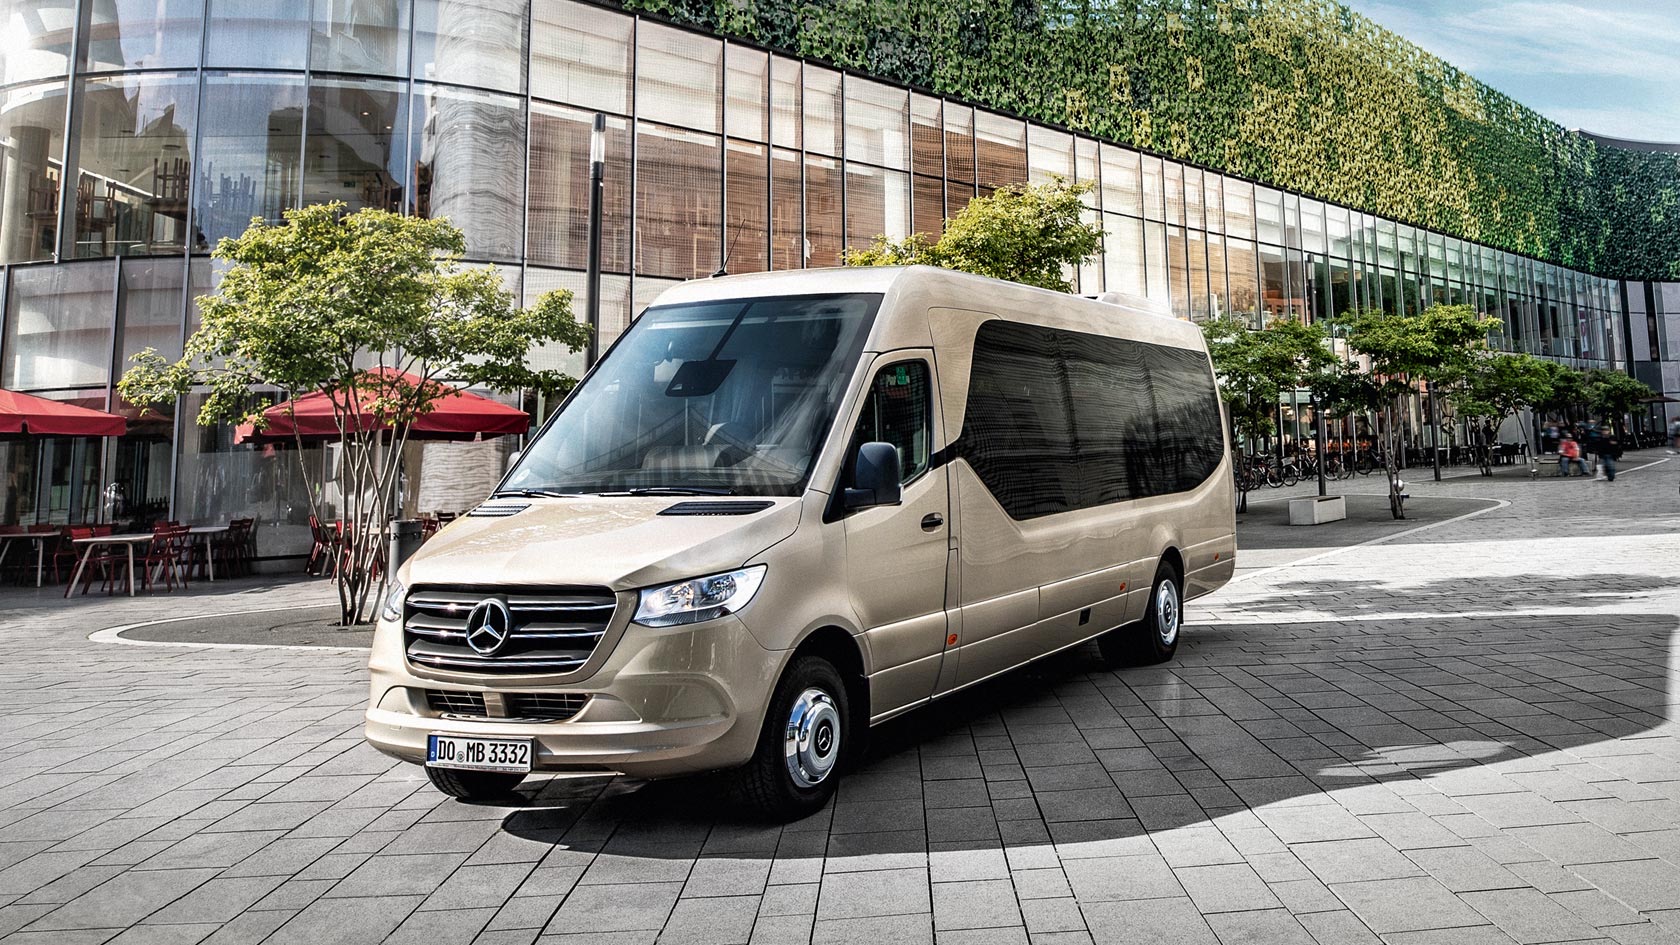 What to Look for When Hiring a Minibus for Group Travel